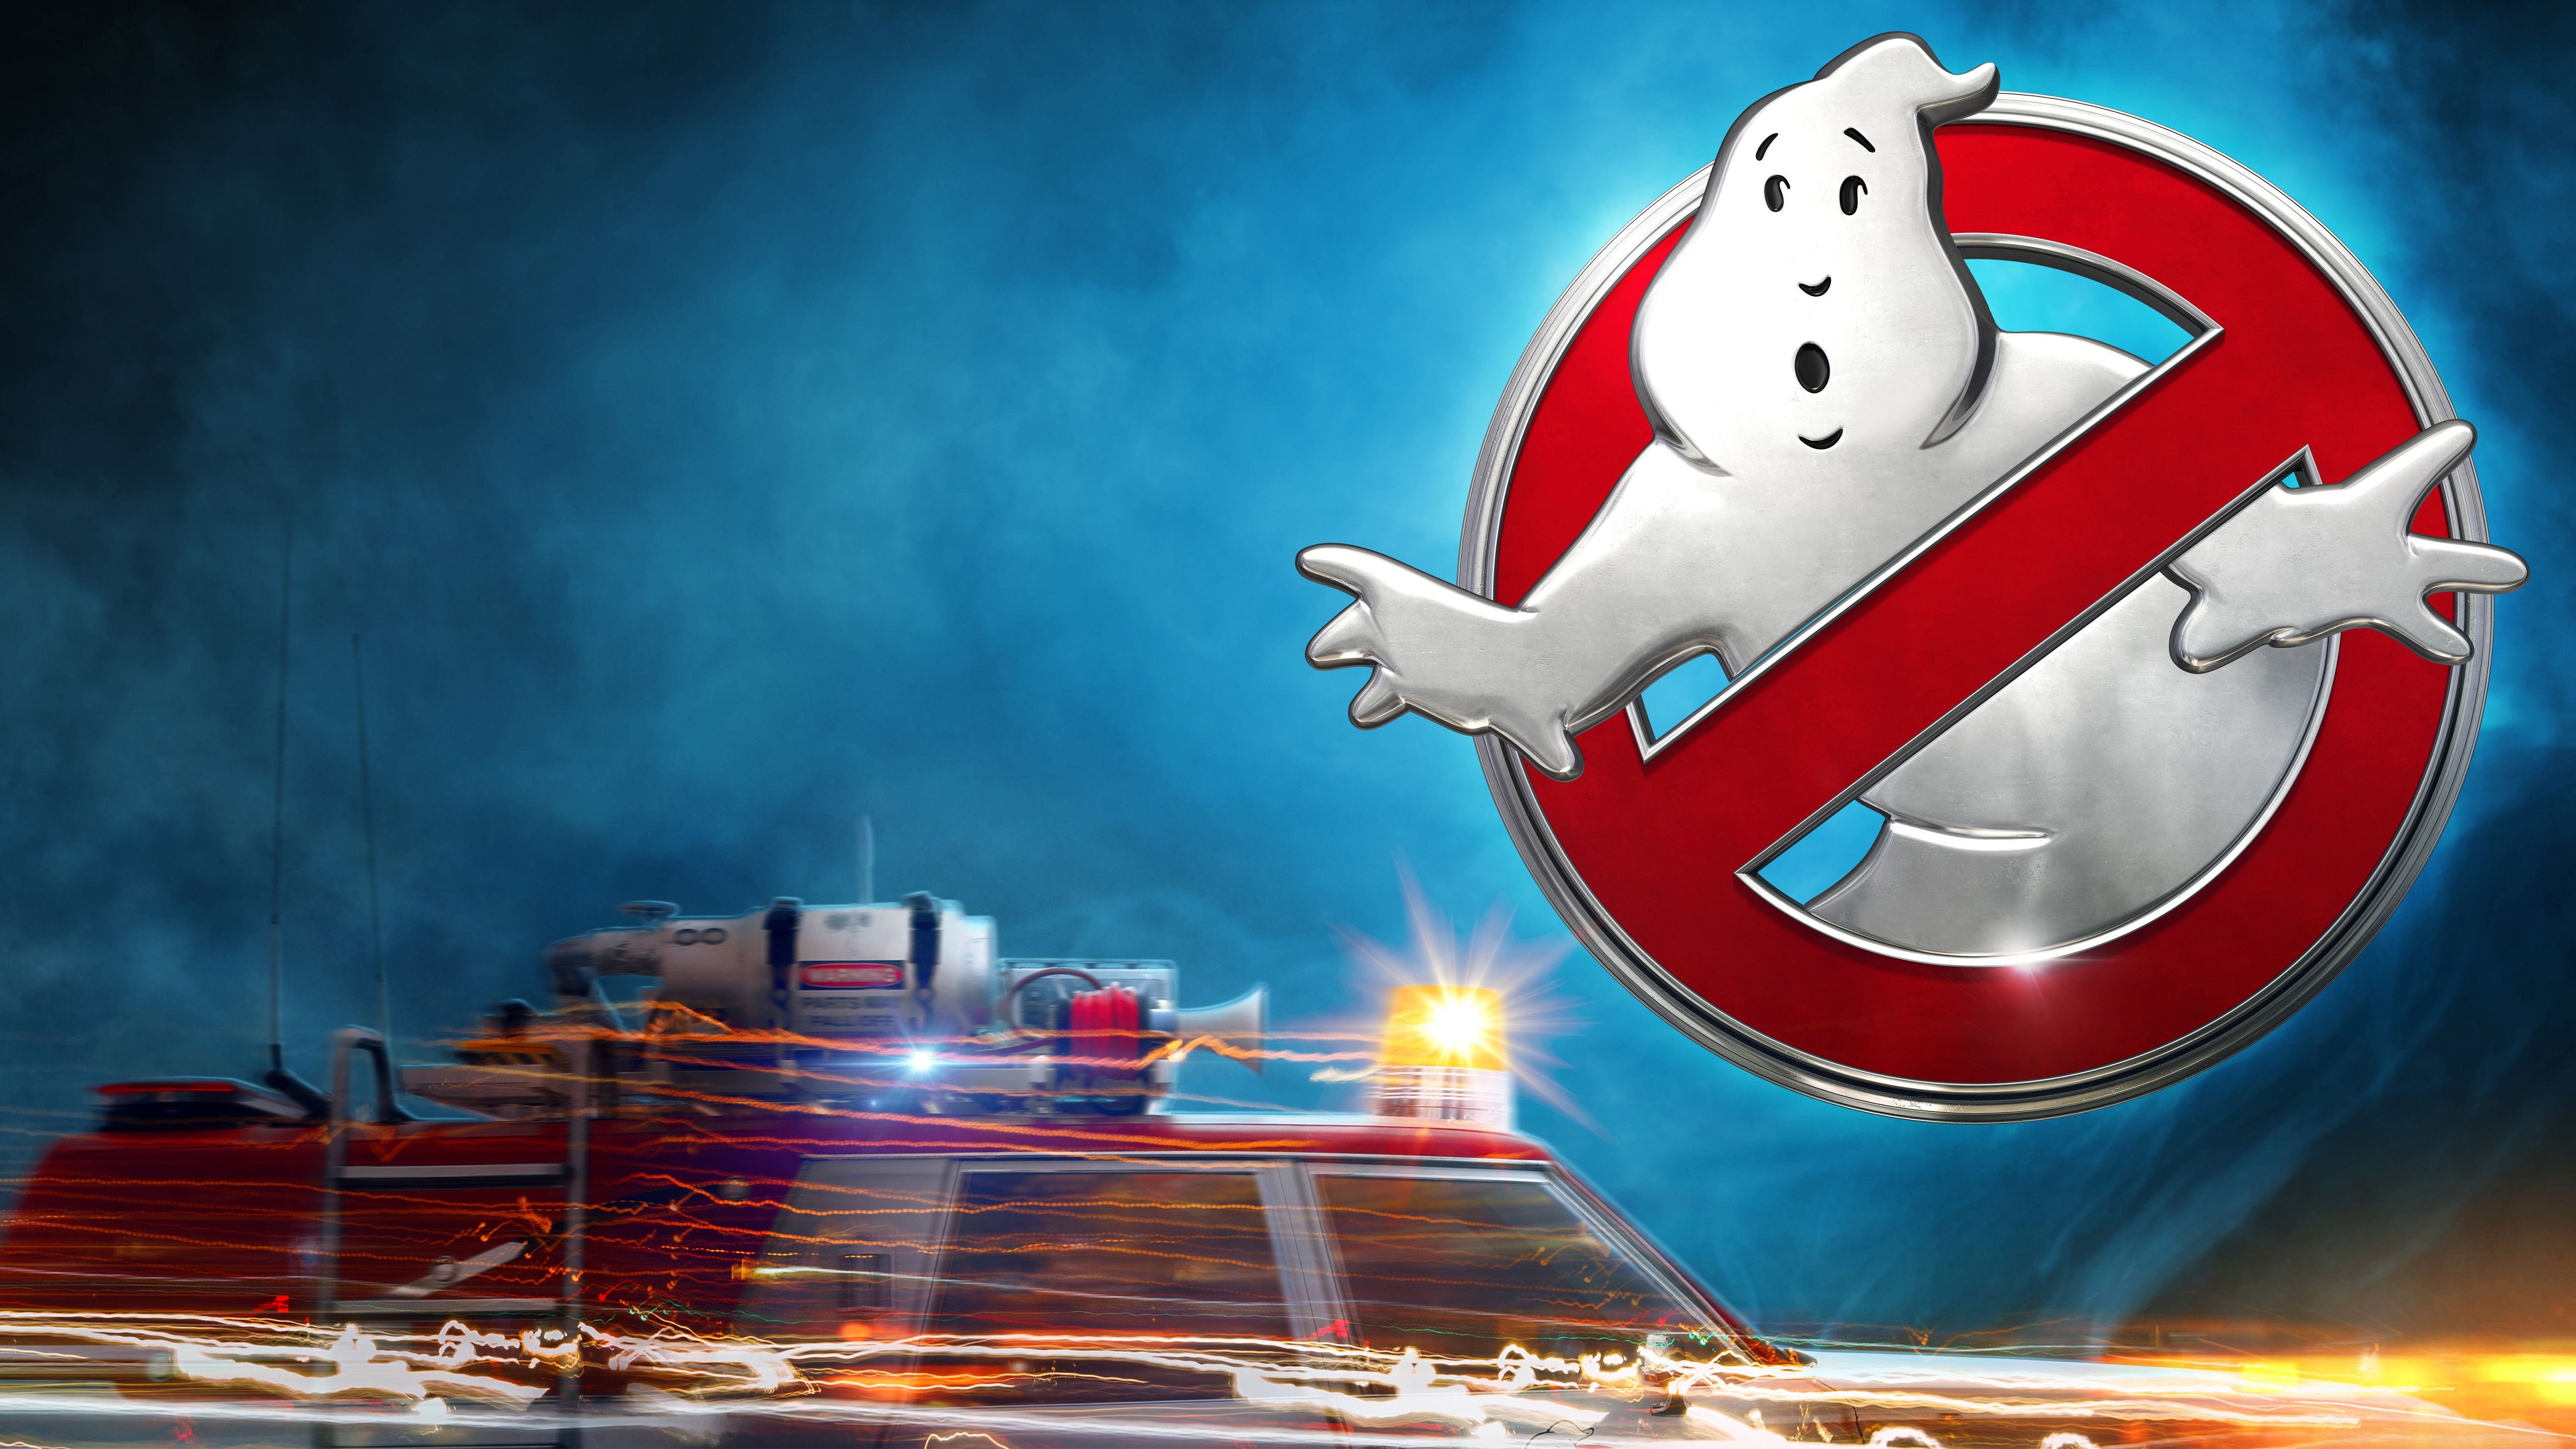 ghostbusters wallpapers wallpaper cave on ghostbusters wallpaper